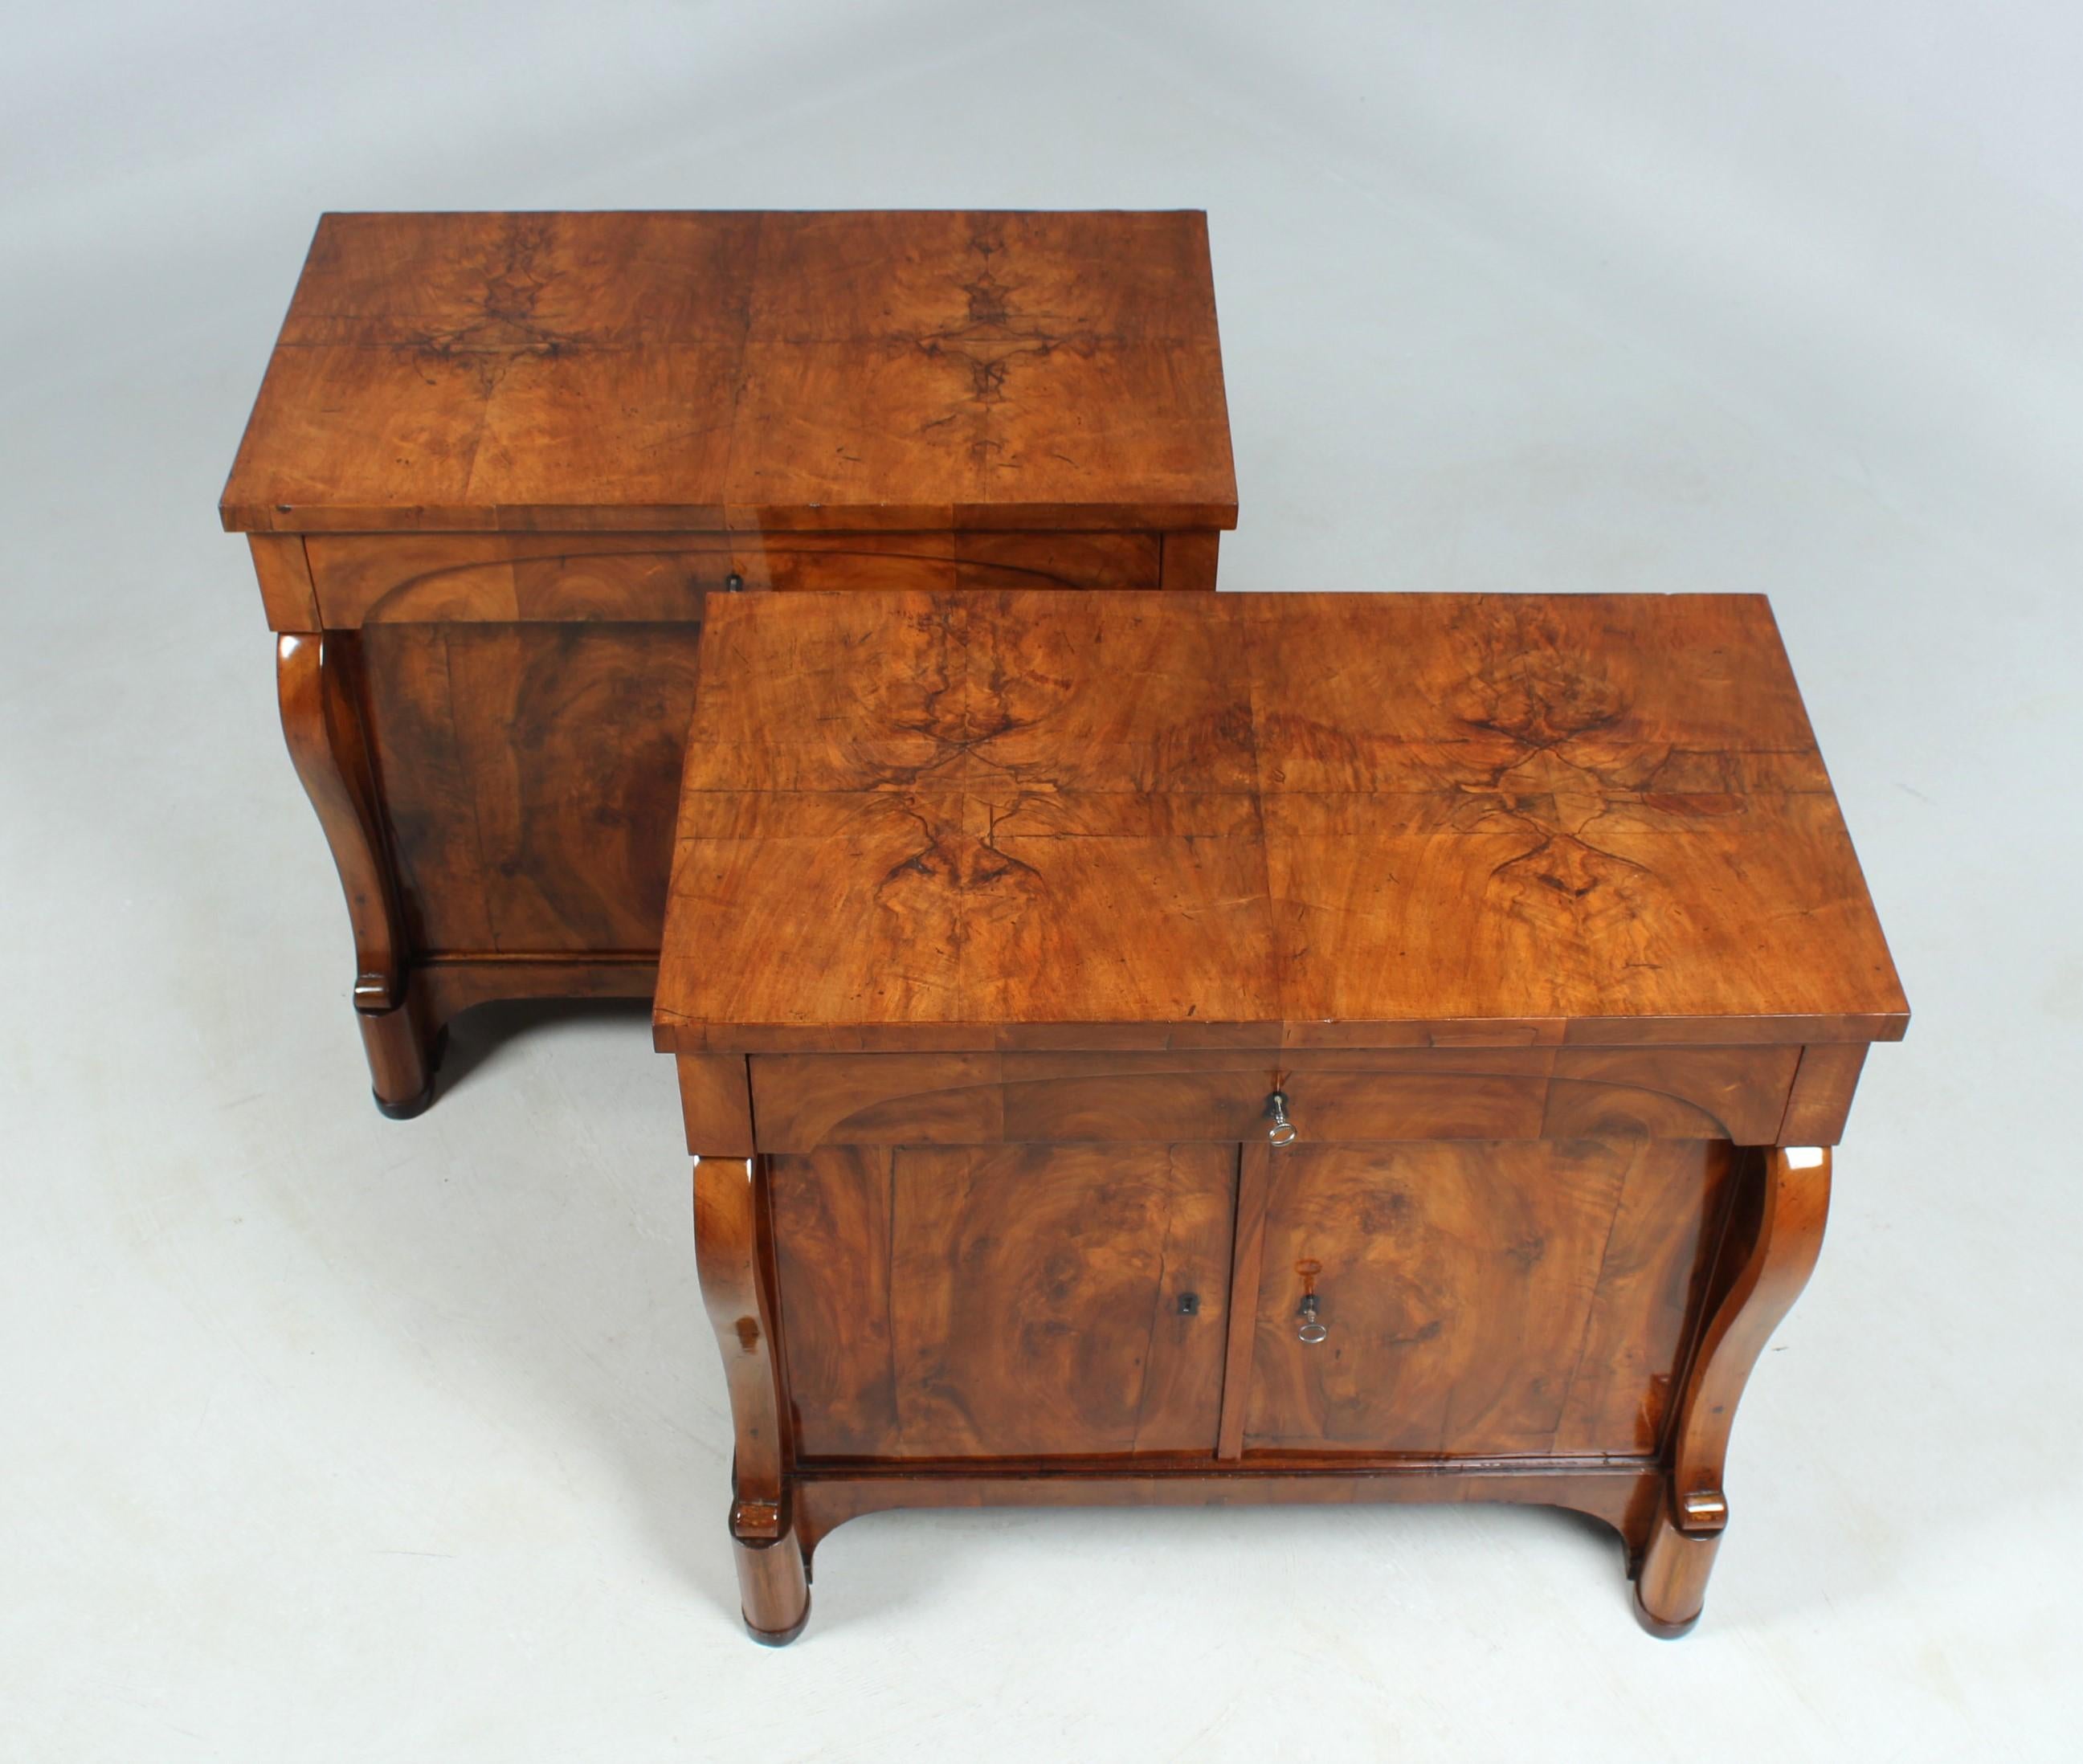 Pair of Early 19th Century Biedermeier Chests or Sideboards, Walnut, c. 1825 11